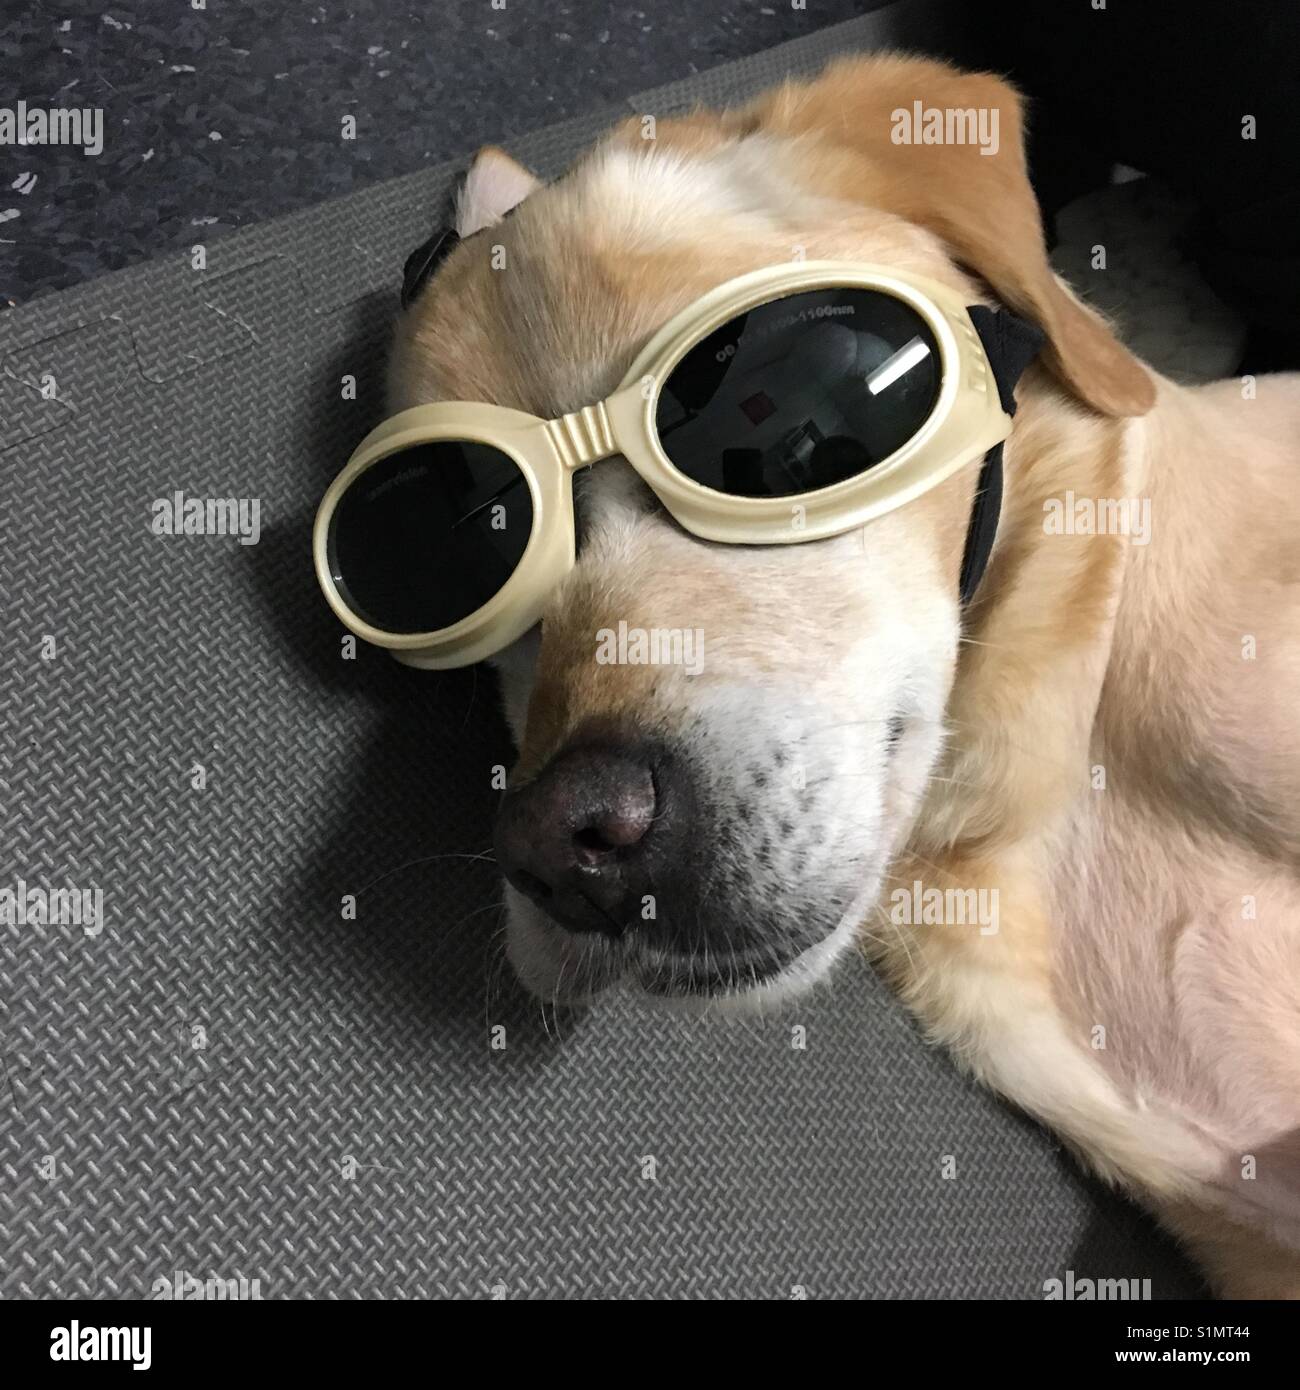 Labrador dog wearing goggles while getting laser treatment Stock Photo